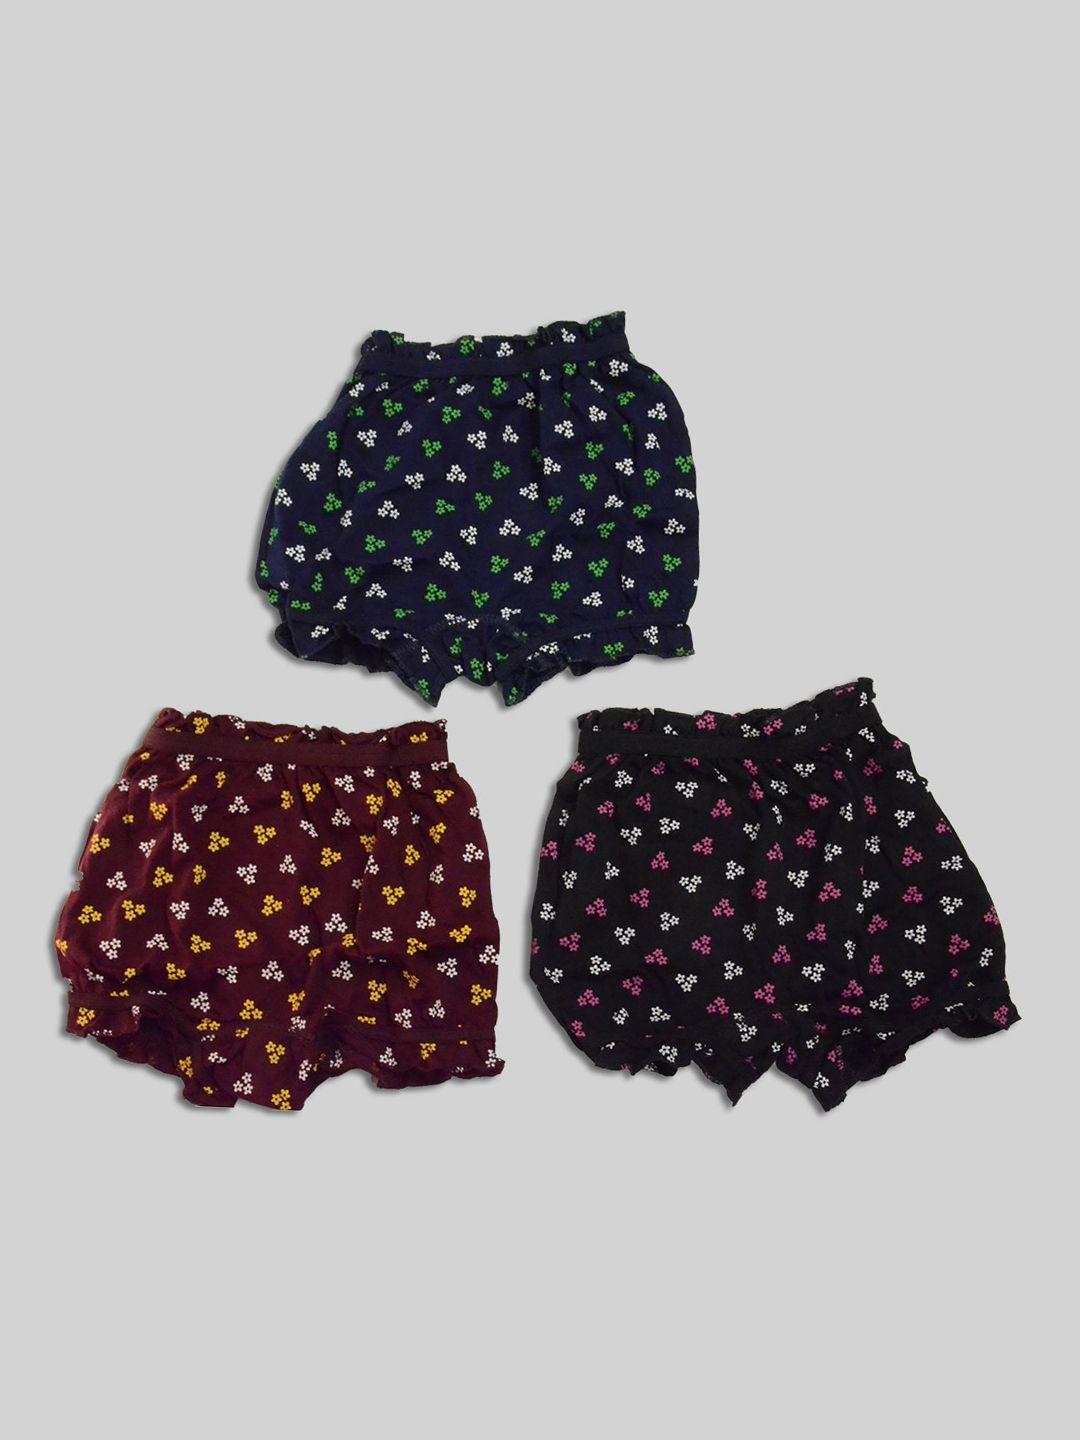 groversons paris beauty girls pack of 3 floral printed cotton boy shorts briefs